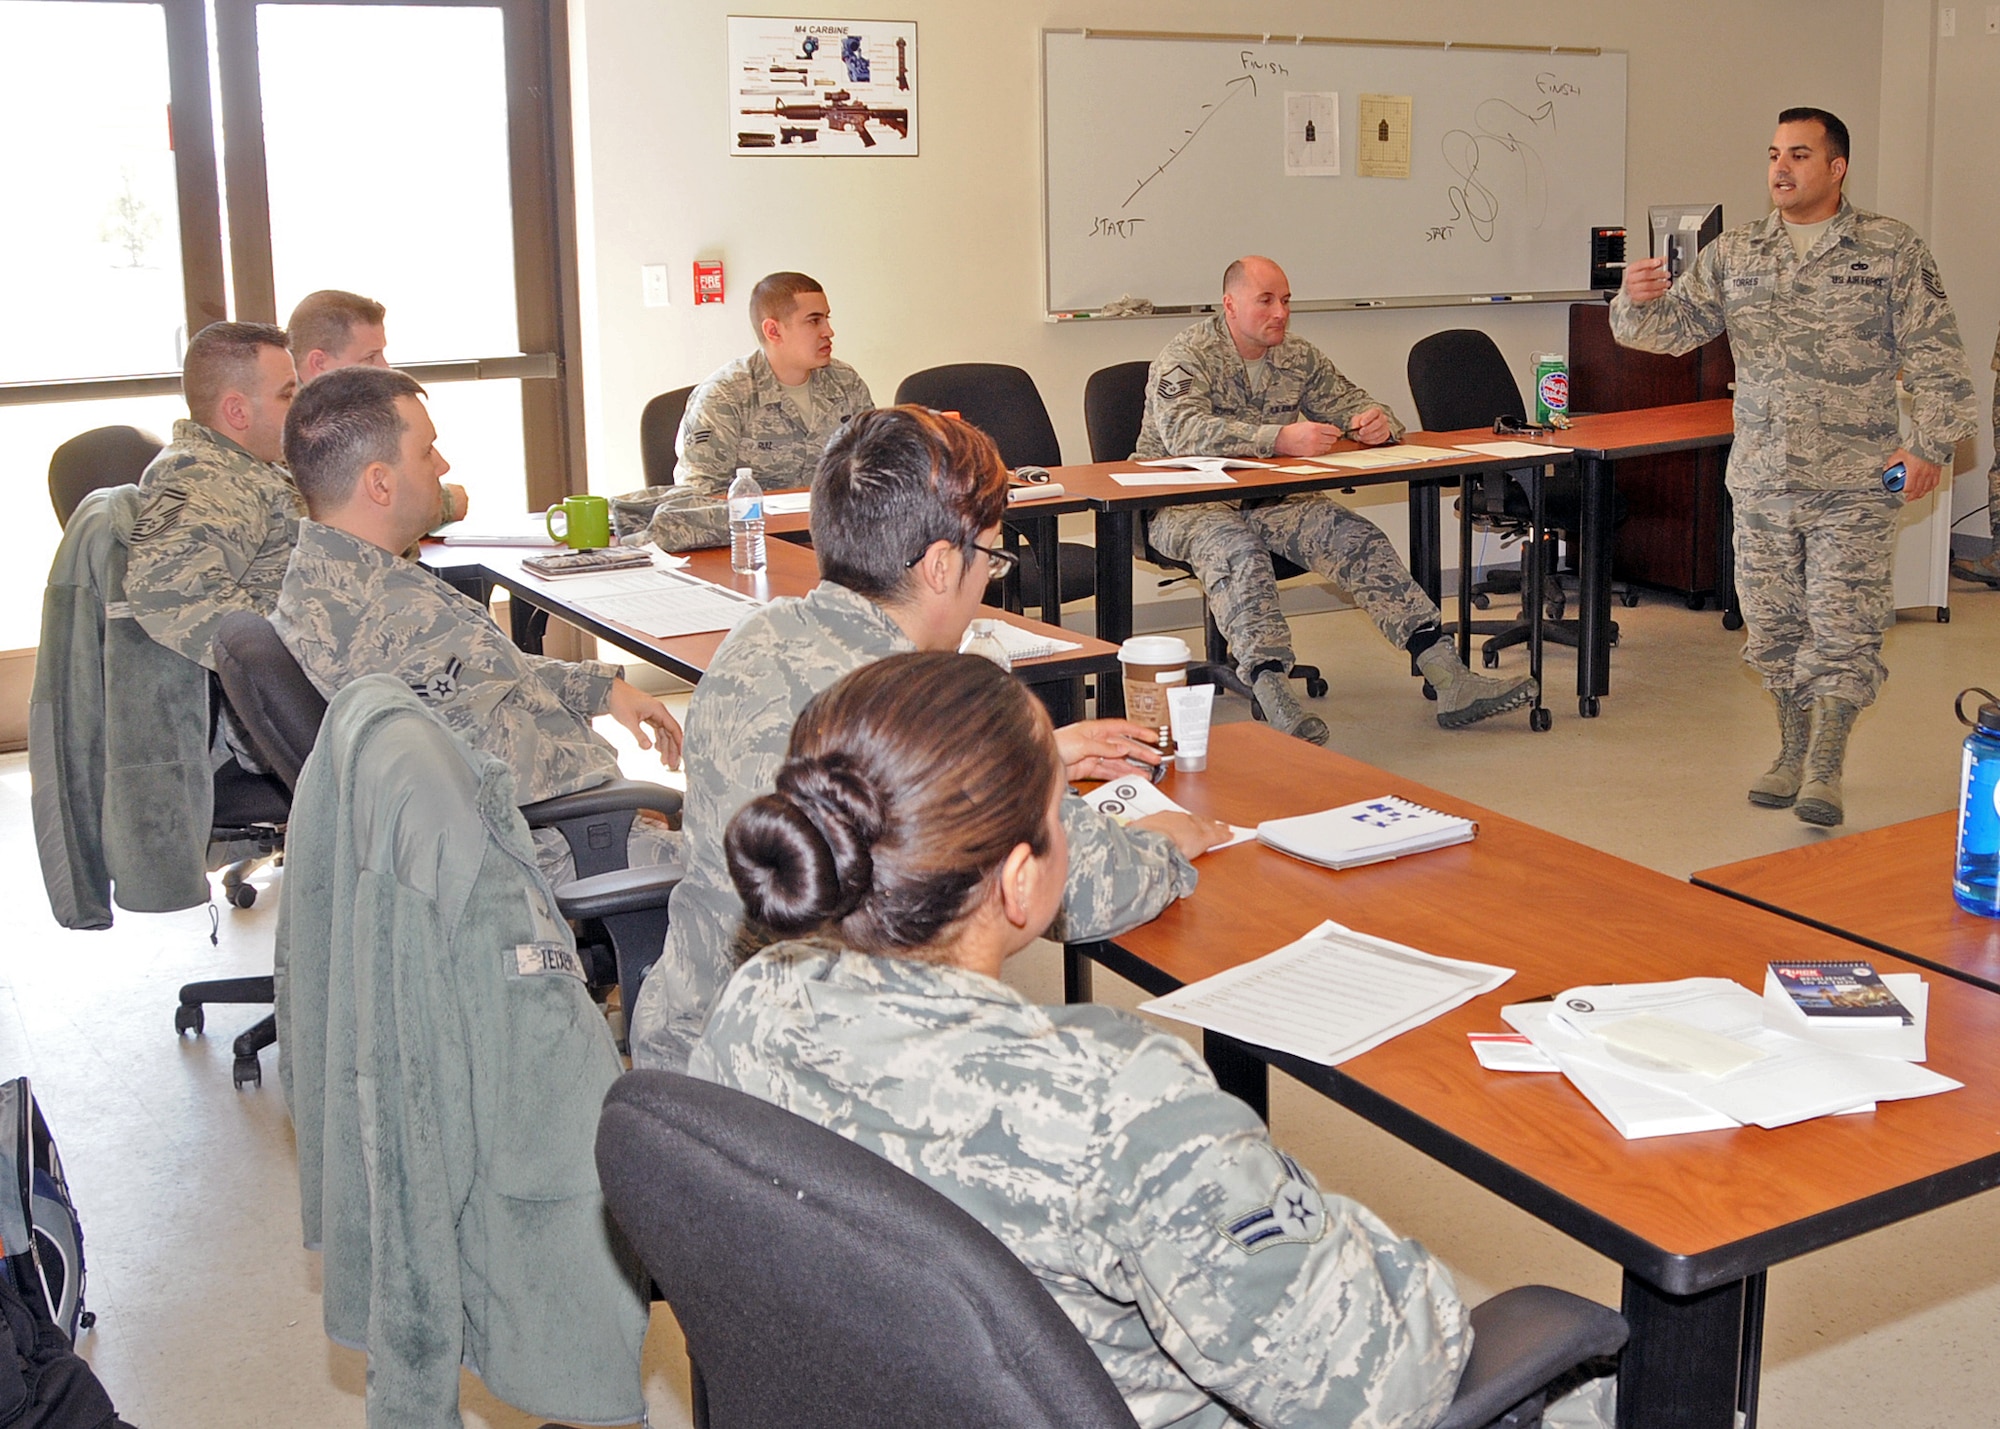 Technical Sergeant Luis Torres, 4th Fighter Wing, briefs new Resilience Training Assistants from the 143d Airlift Wing, 102nd Network Warfare Squadron and the 282nd Combat Communications Squadron, Rhode Island Air National Guard at Quonset Air National Guard Base, North Kingstown, Rhode Island. National Guard Photo by Tech Sgt Jason Long (RELEASED)